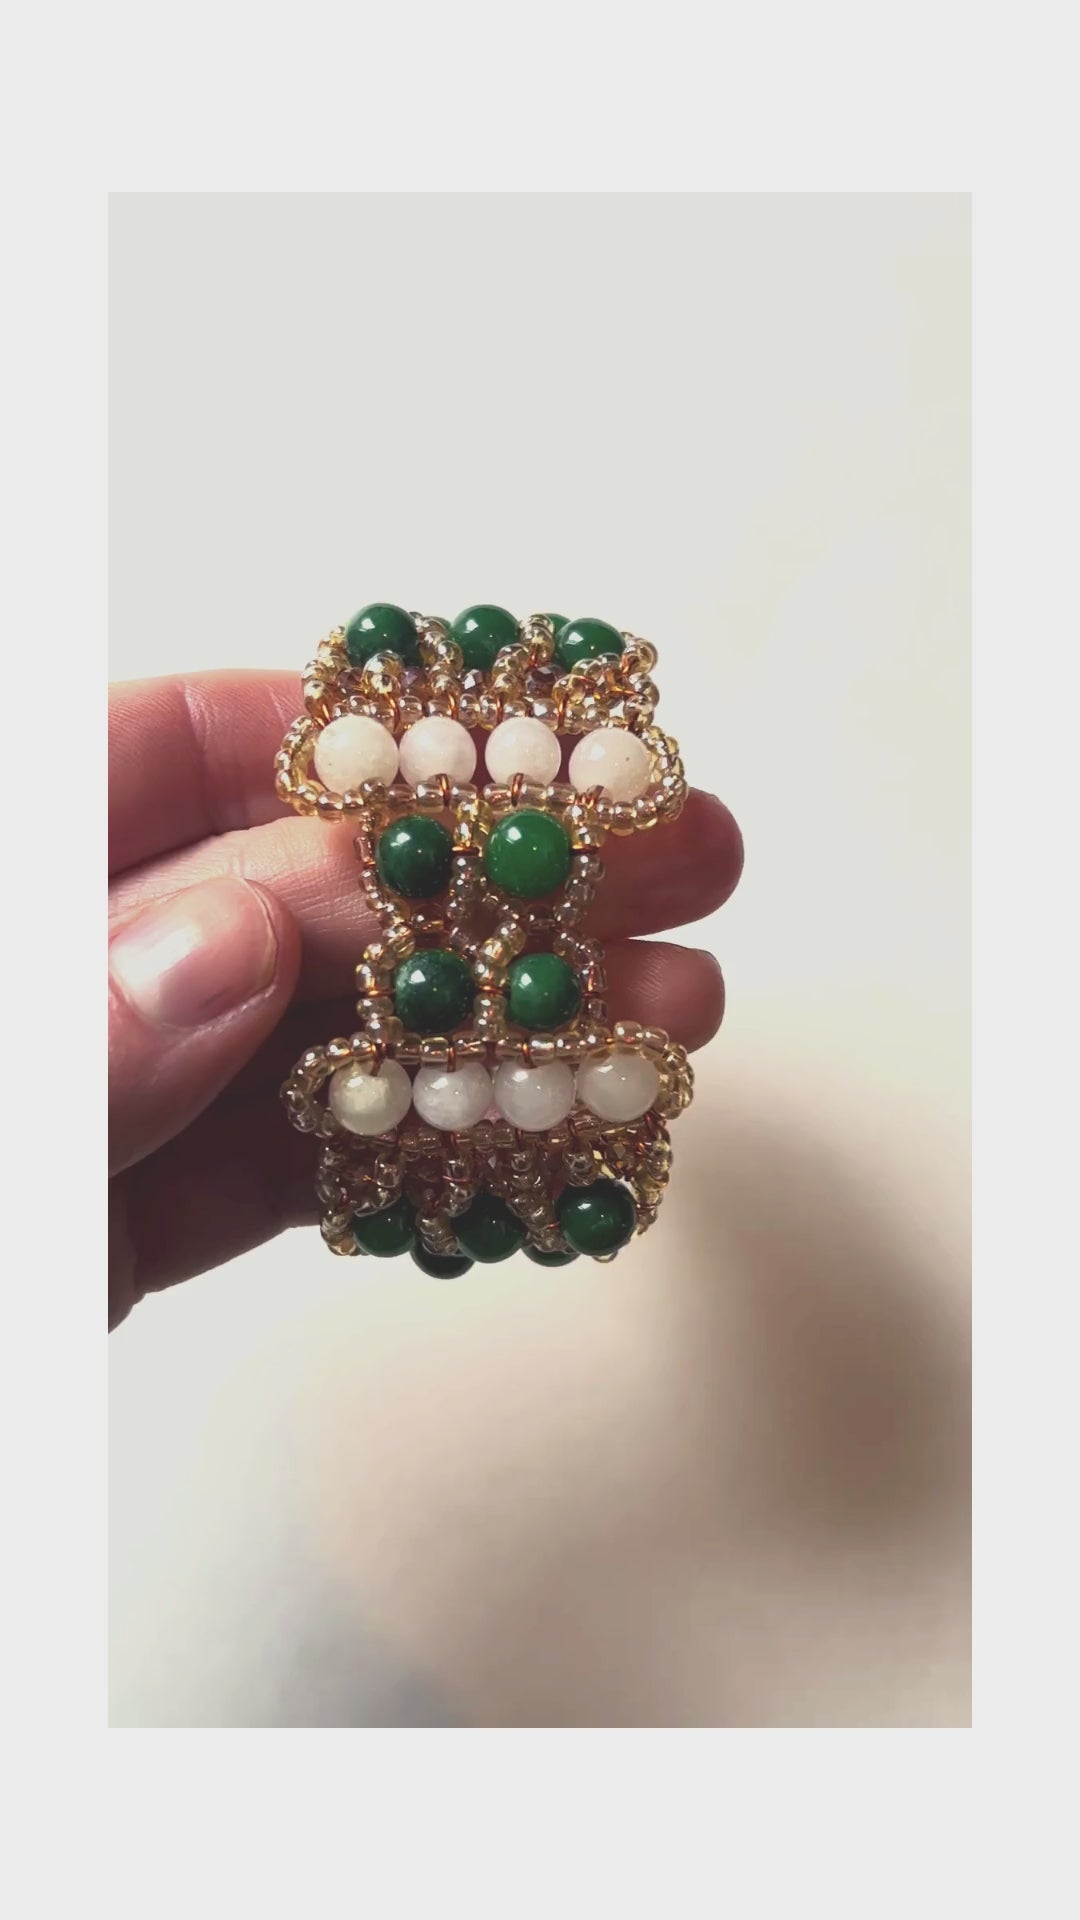 Hand beaded jade bracelet with a nod towards art deco with crystal and seed beads added for visual flare. We think the designers are genious and we got the only one they created in this pattern - a work of art and one of a kind.